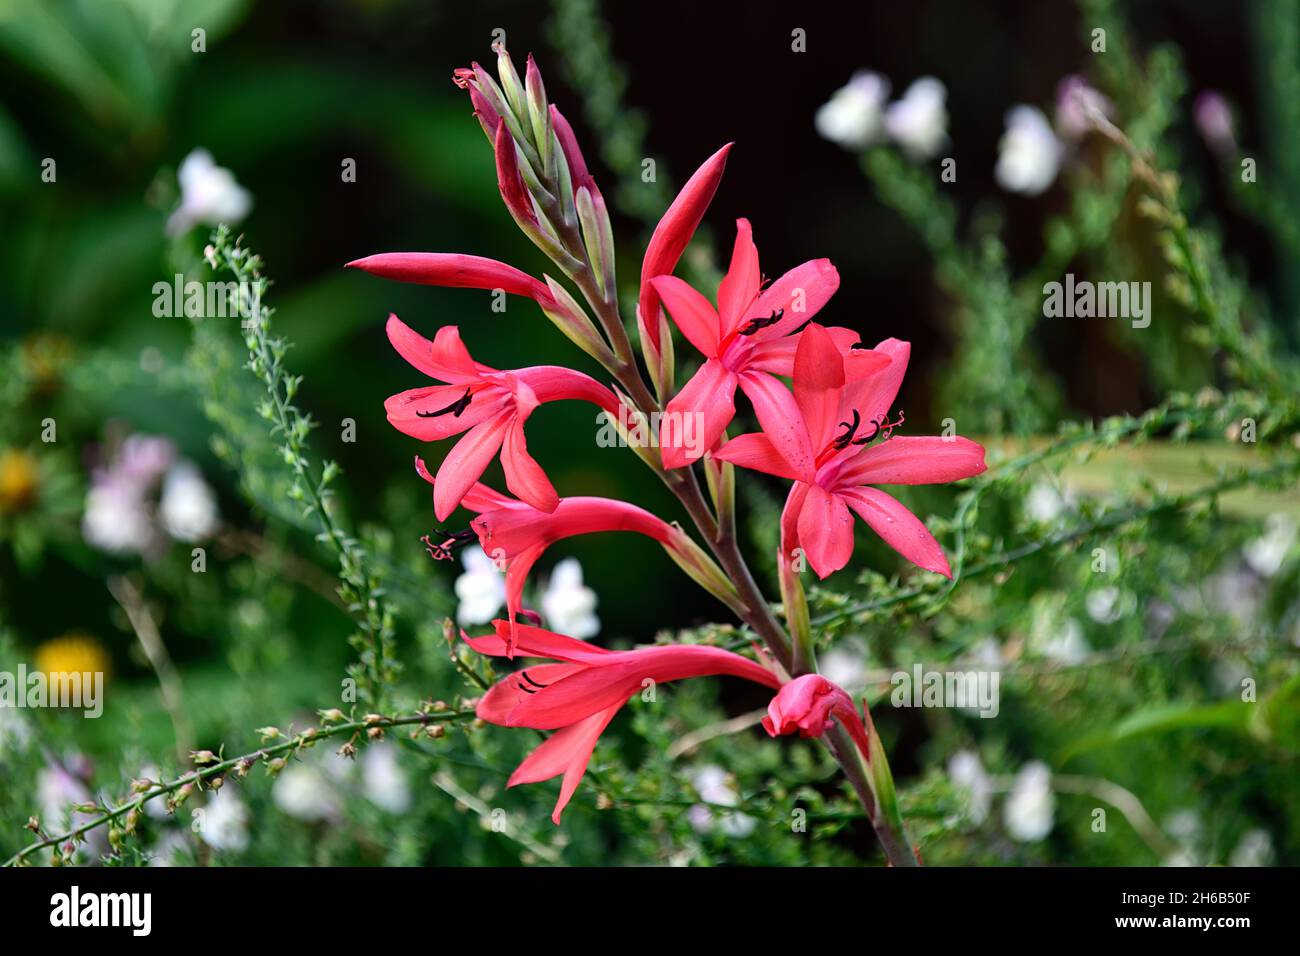 Watsonia Borbonica,Bugle lily,pink flower,coral pink flowers,pink watsonias,flower,flowers,spike,spikes,perennial,mixed bed,border,planting scheme,RM Stock Photo